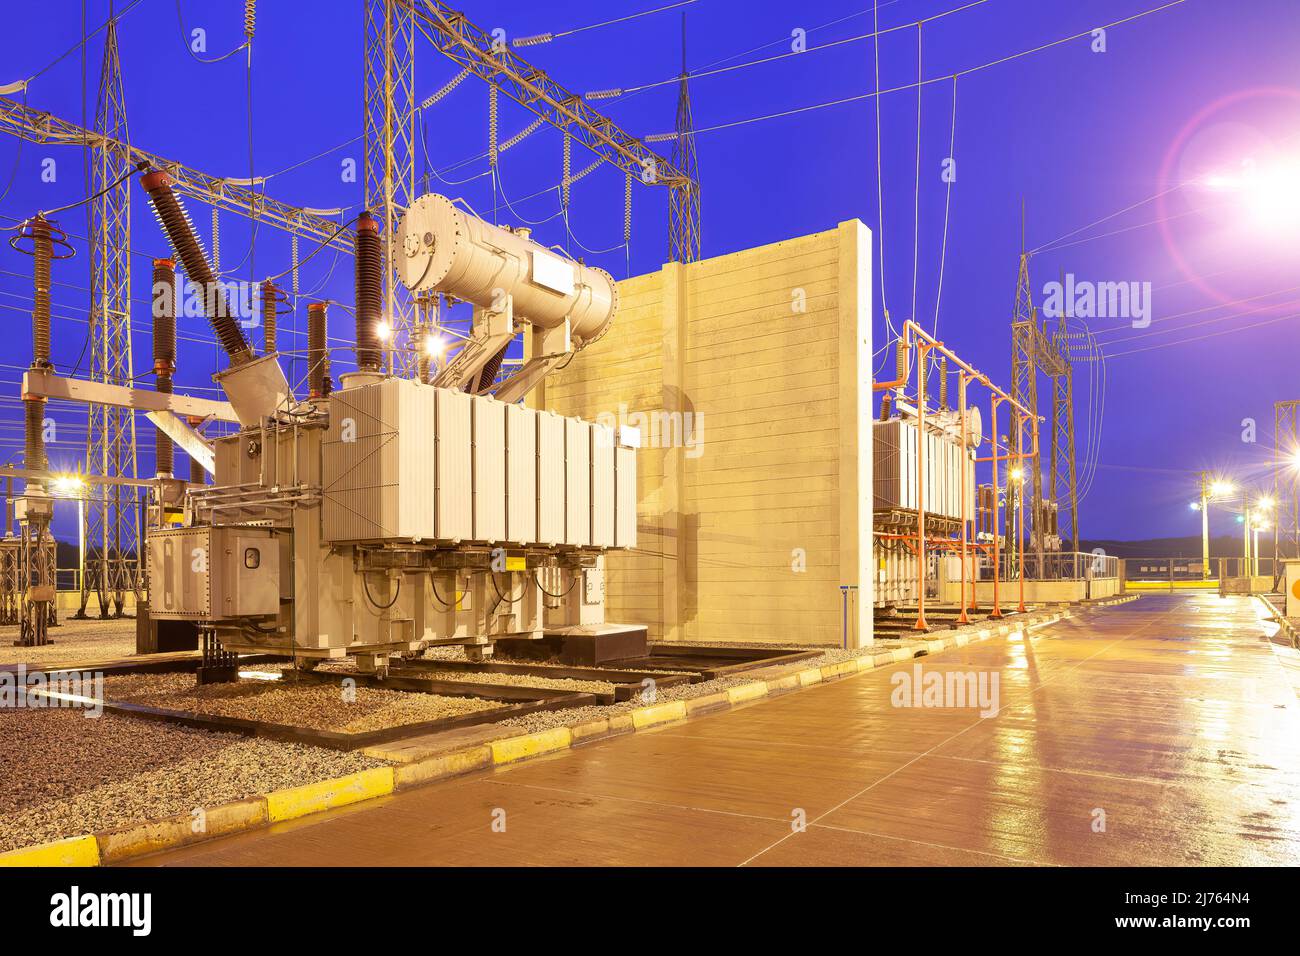 A group of Power Transformer in High Voltage Electrical Outdoor Substation Stock Photo